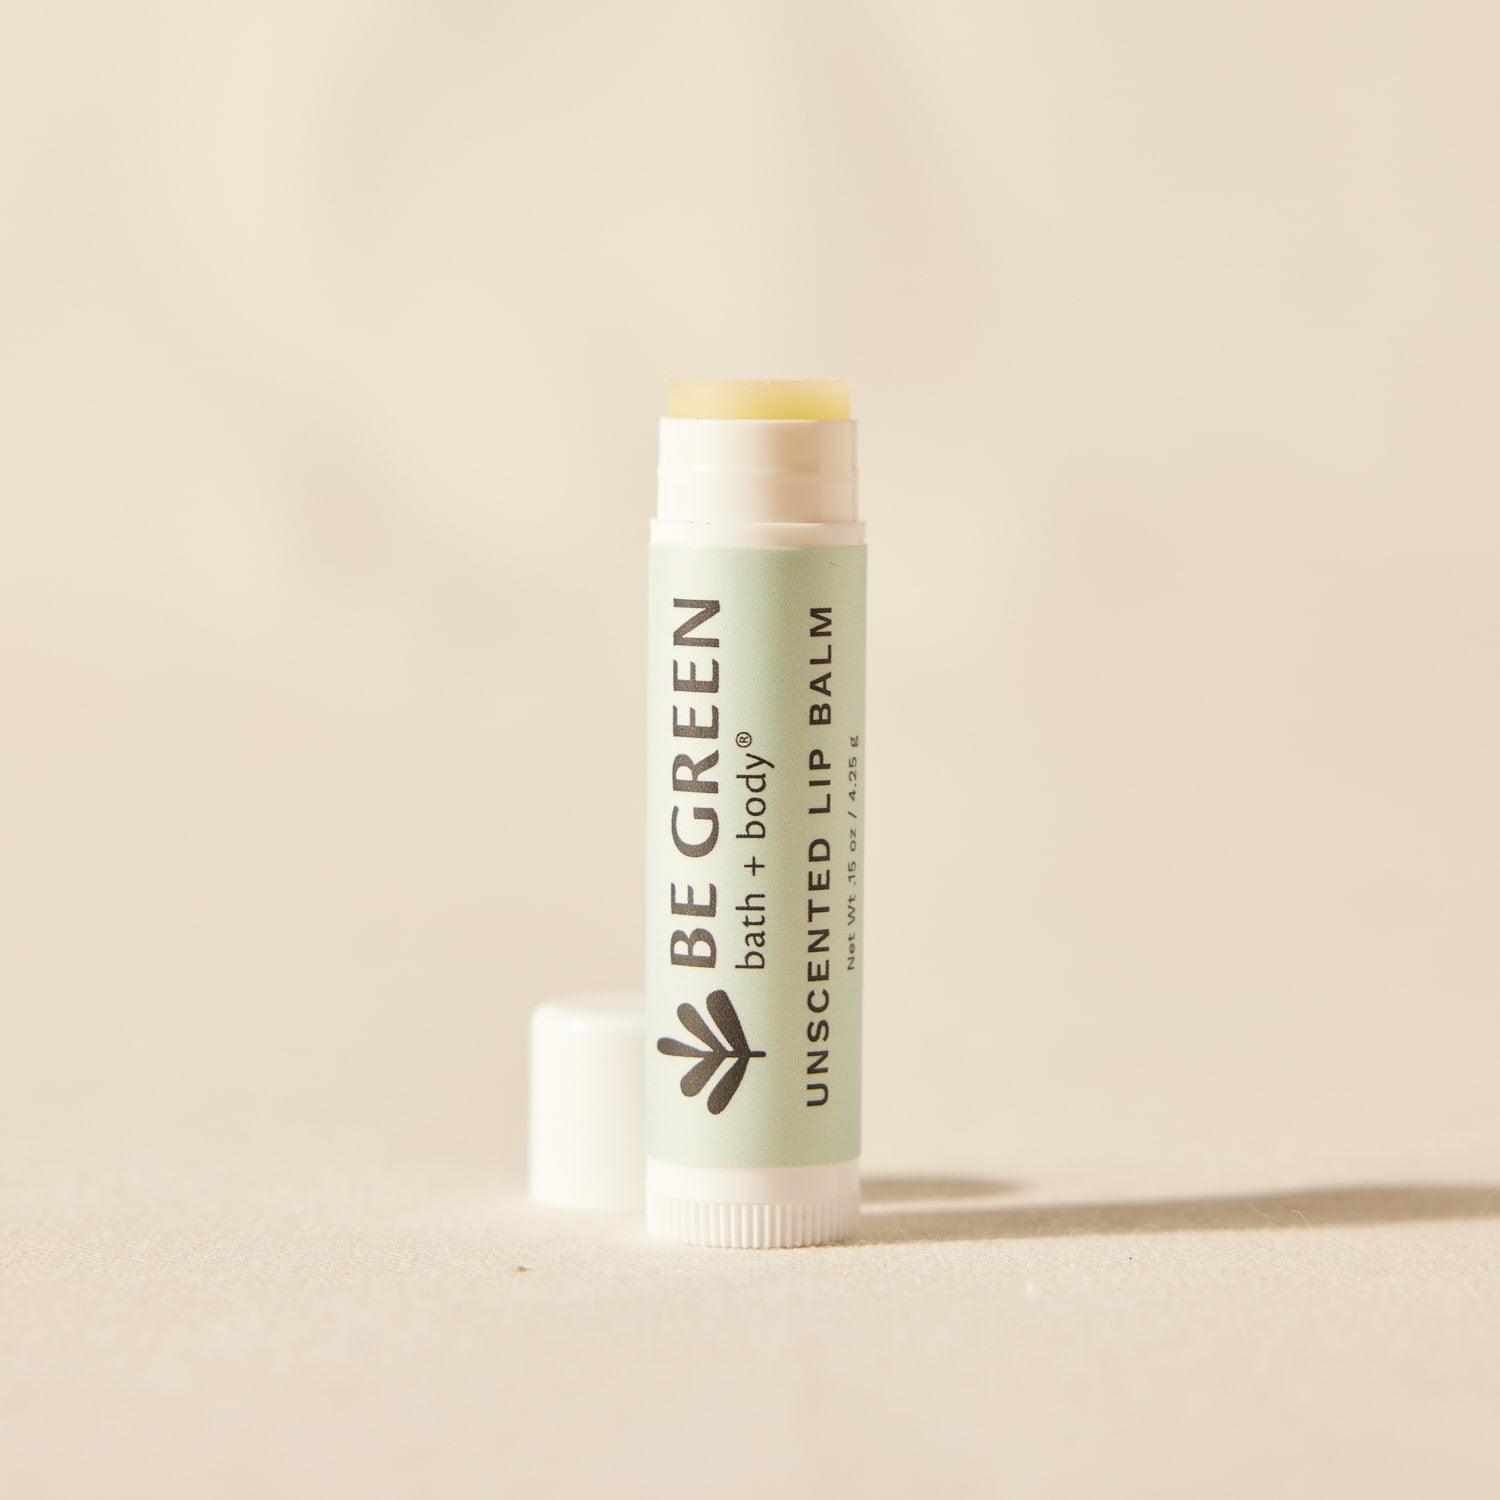 EWG verified unscented lip balm with cap off.